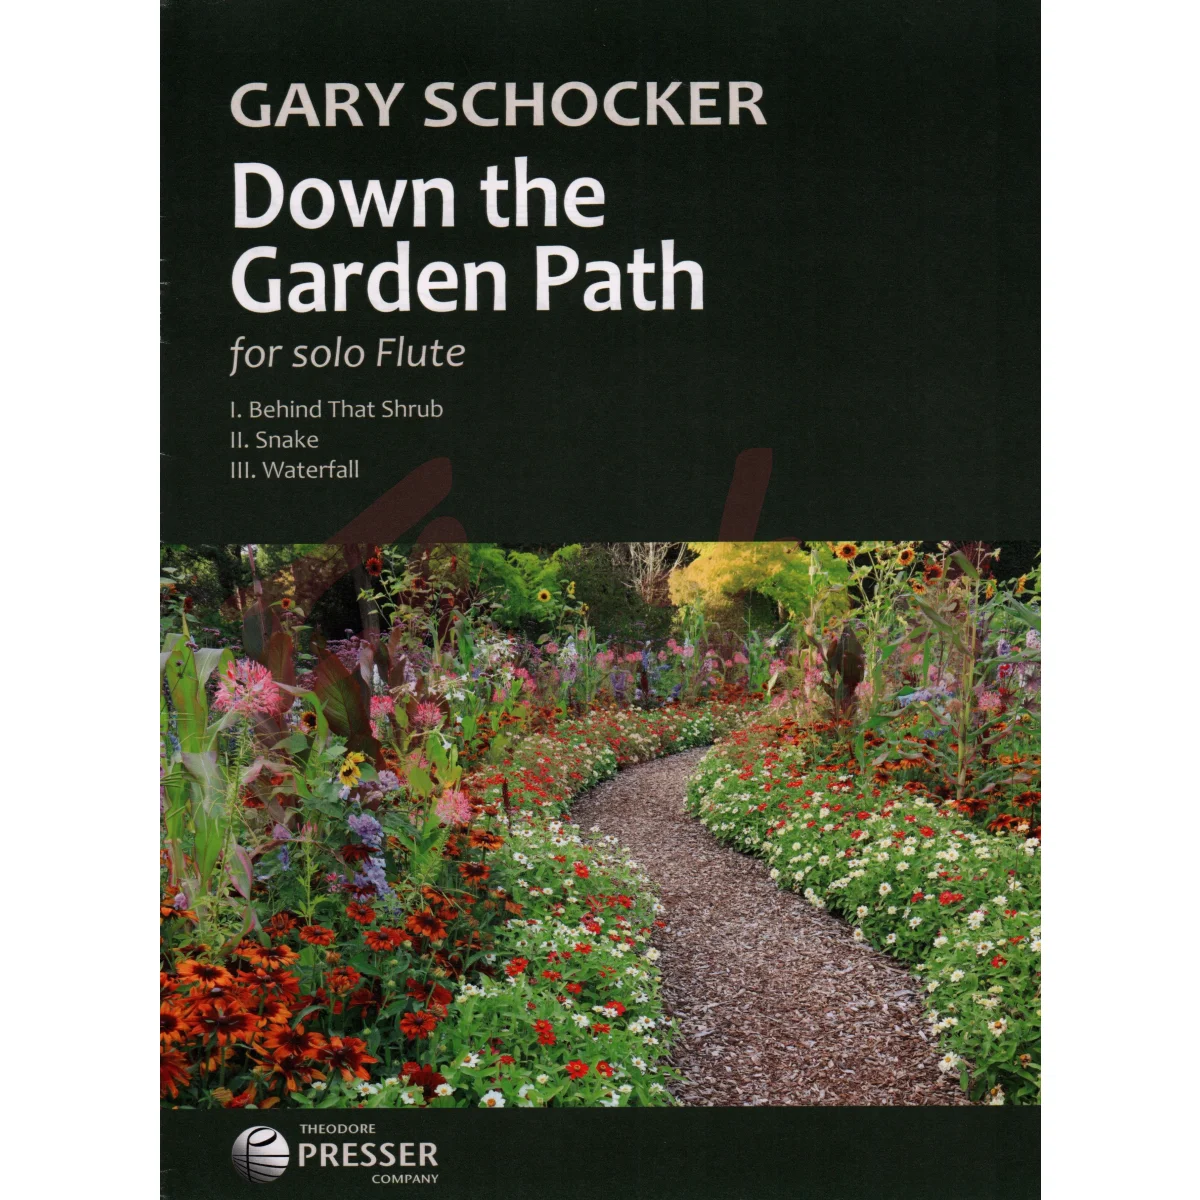 Down the Garden Path for Solo Flute